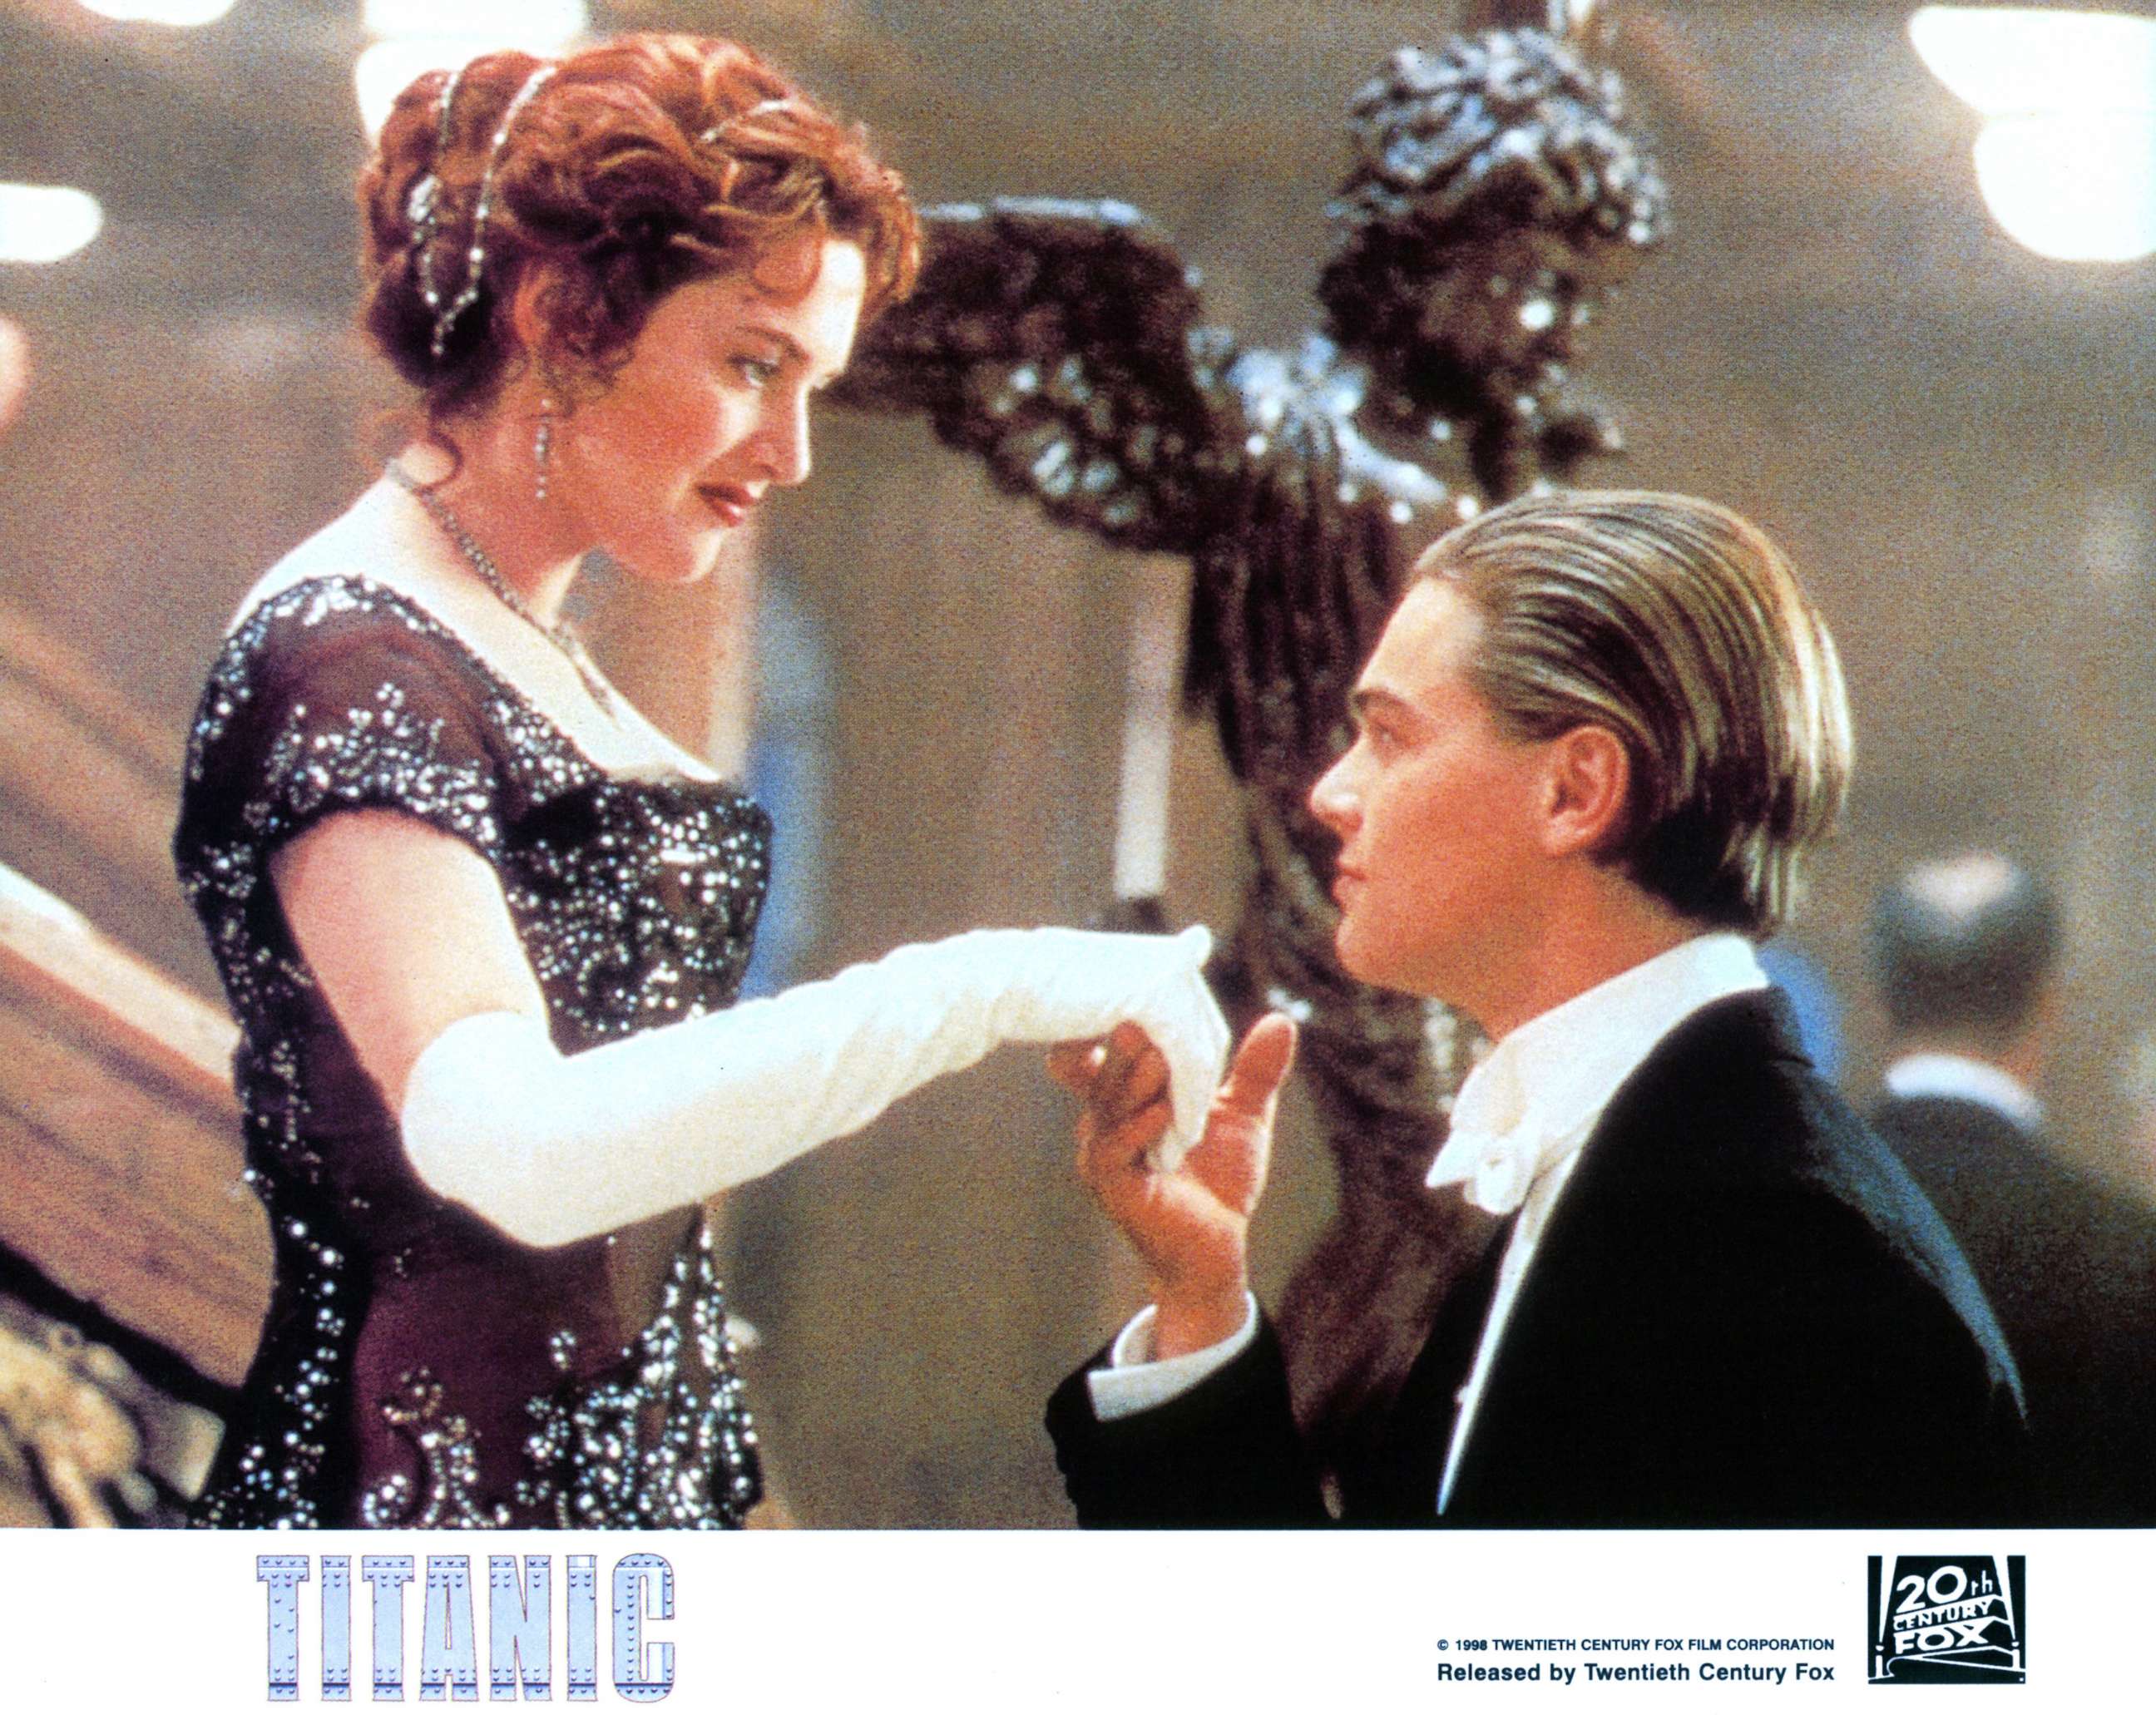 PHOTO: Kate Winslet and Leonardo DiCaprio appear in a scene from the film 'Titanic', 1997.